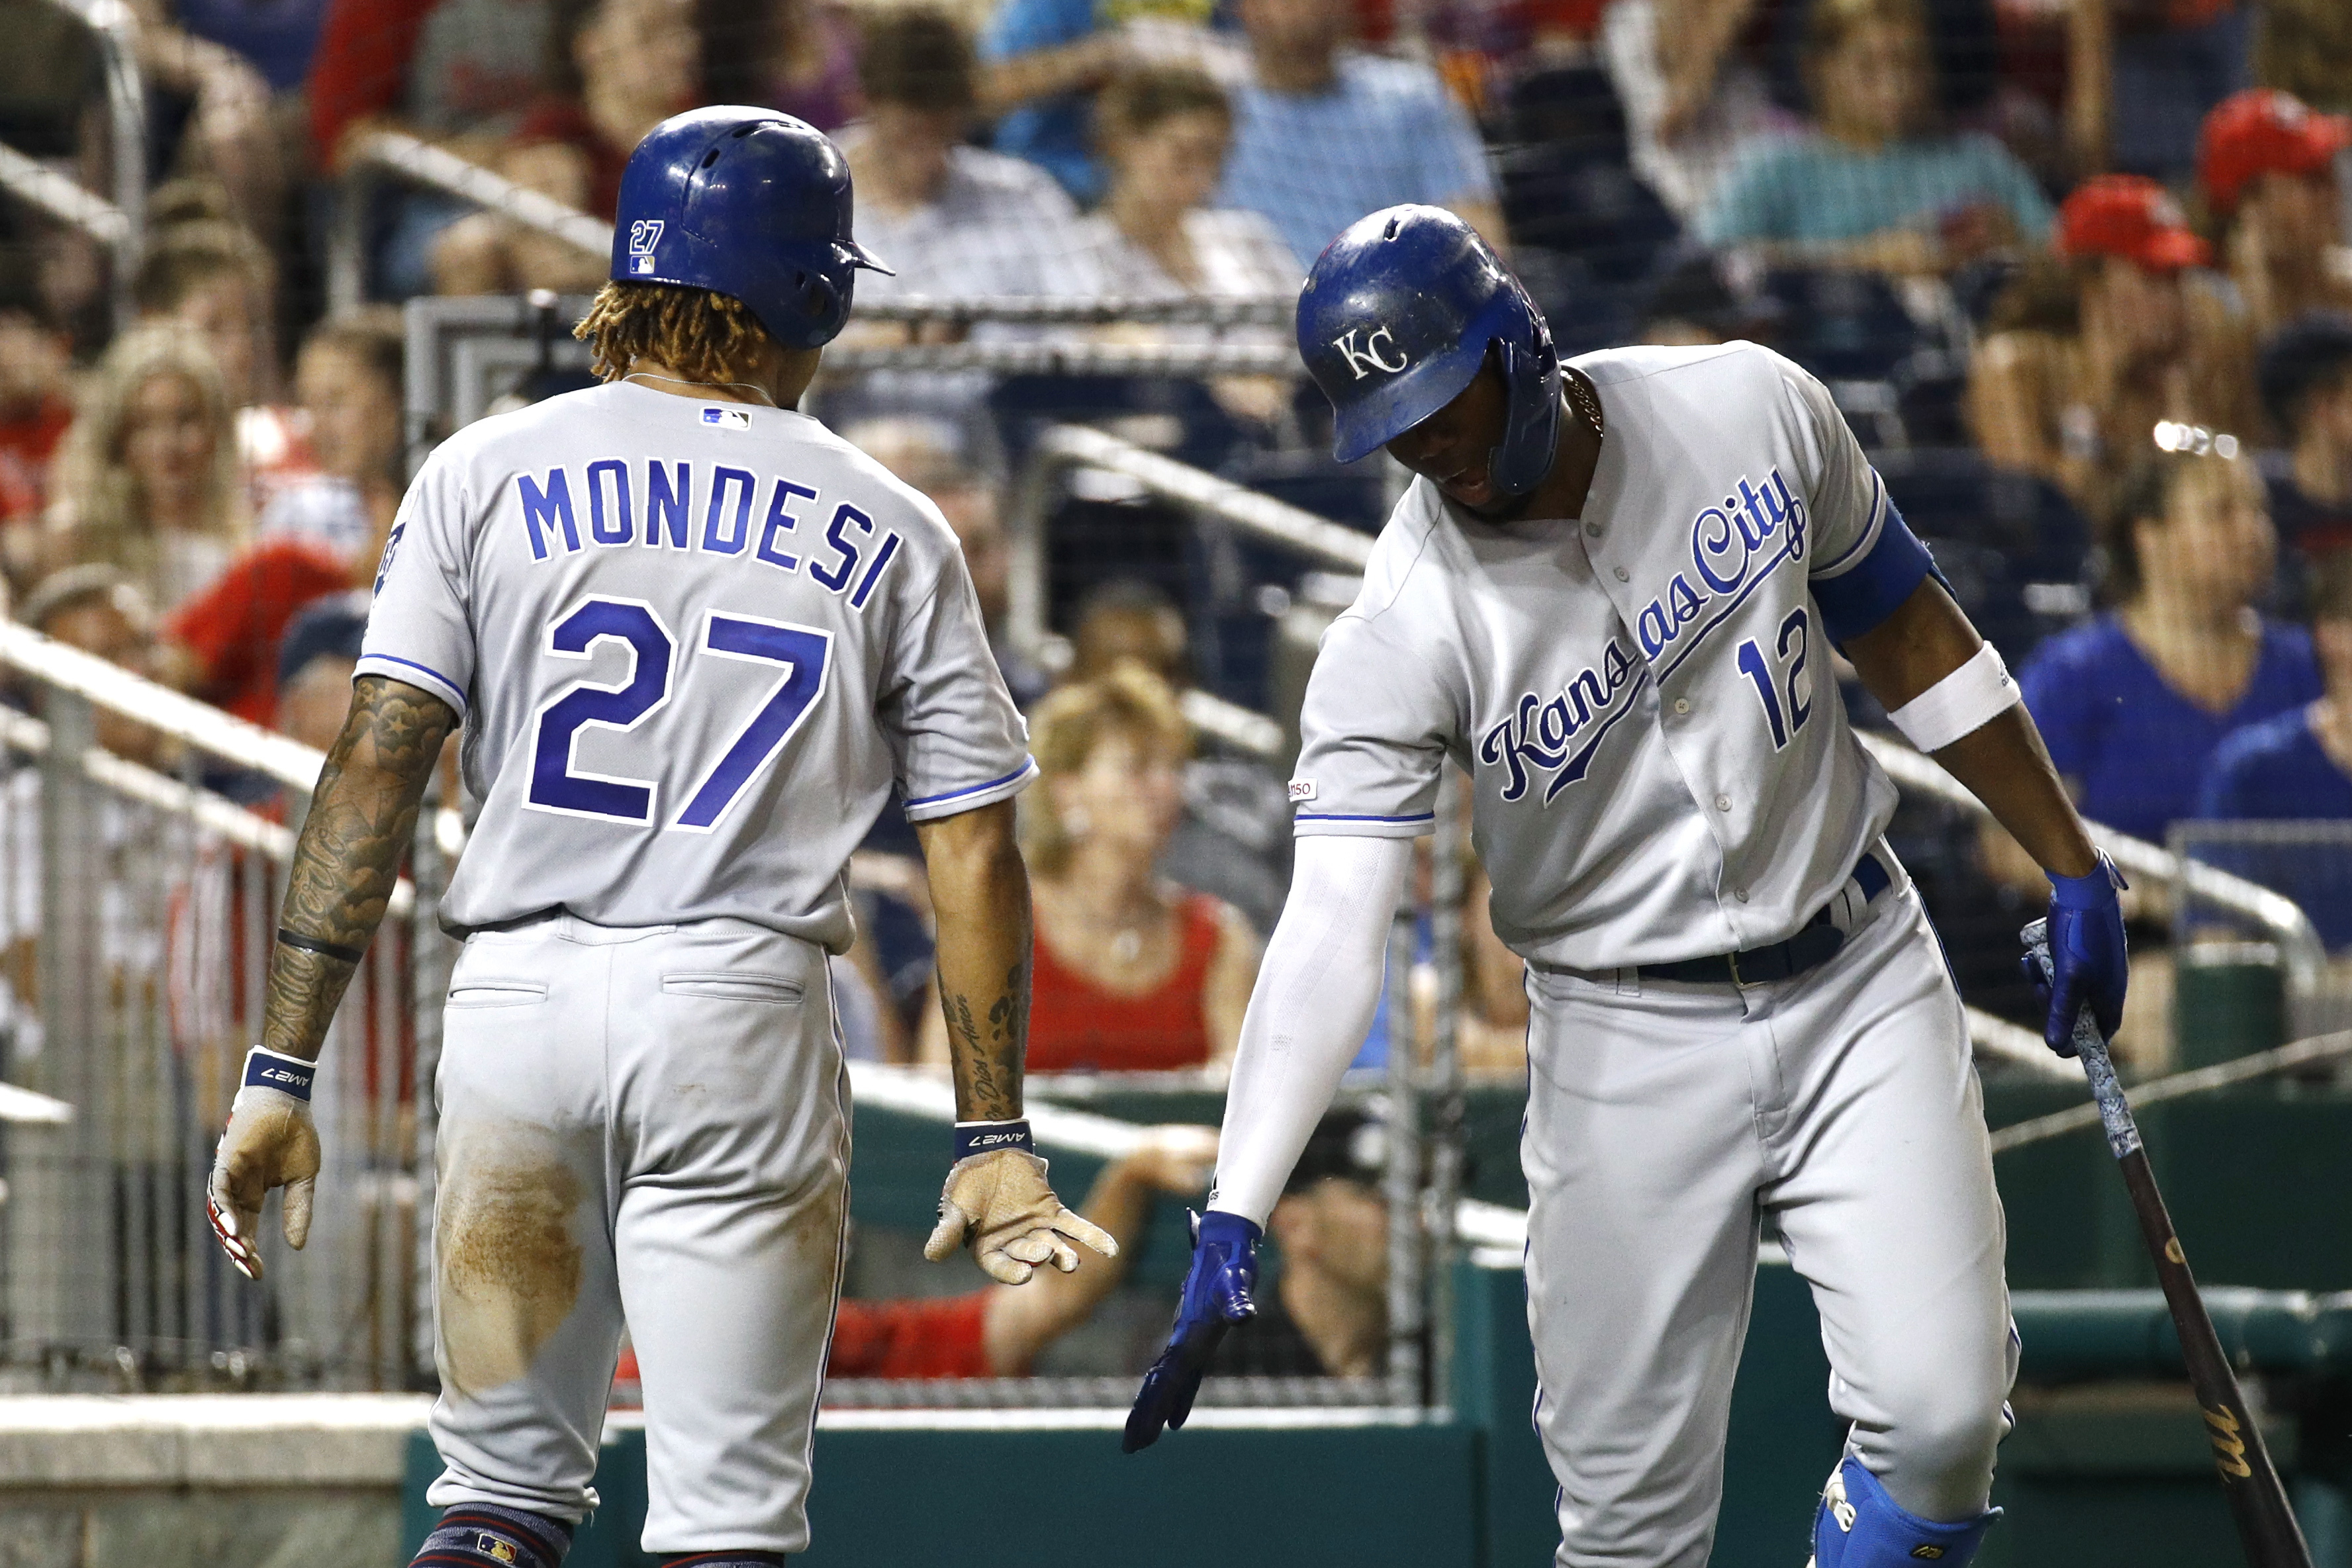 Royals score 3 in 11th inning to outlast Nationals 7-4